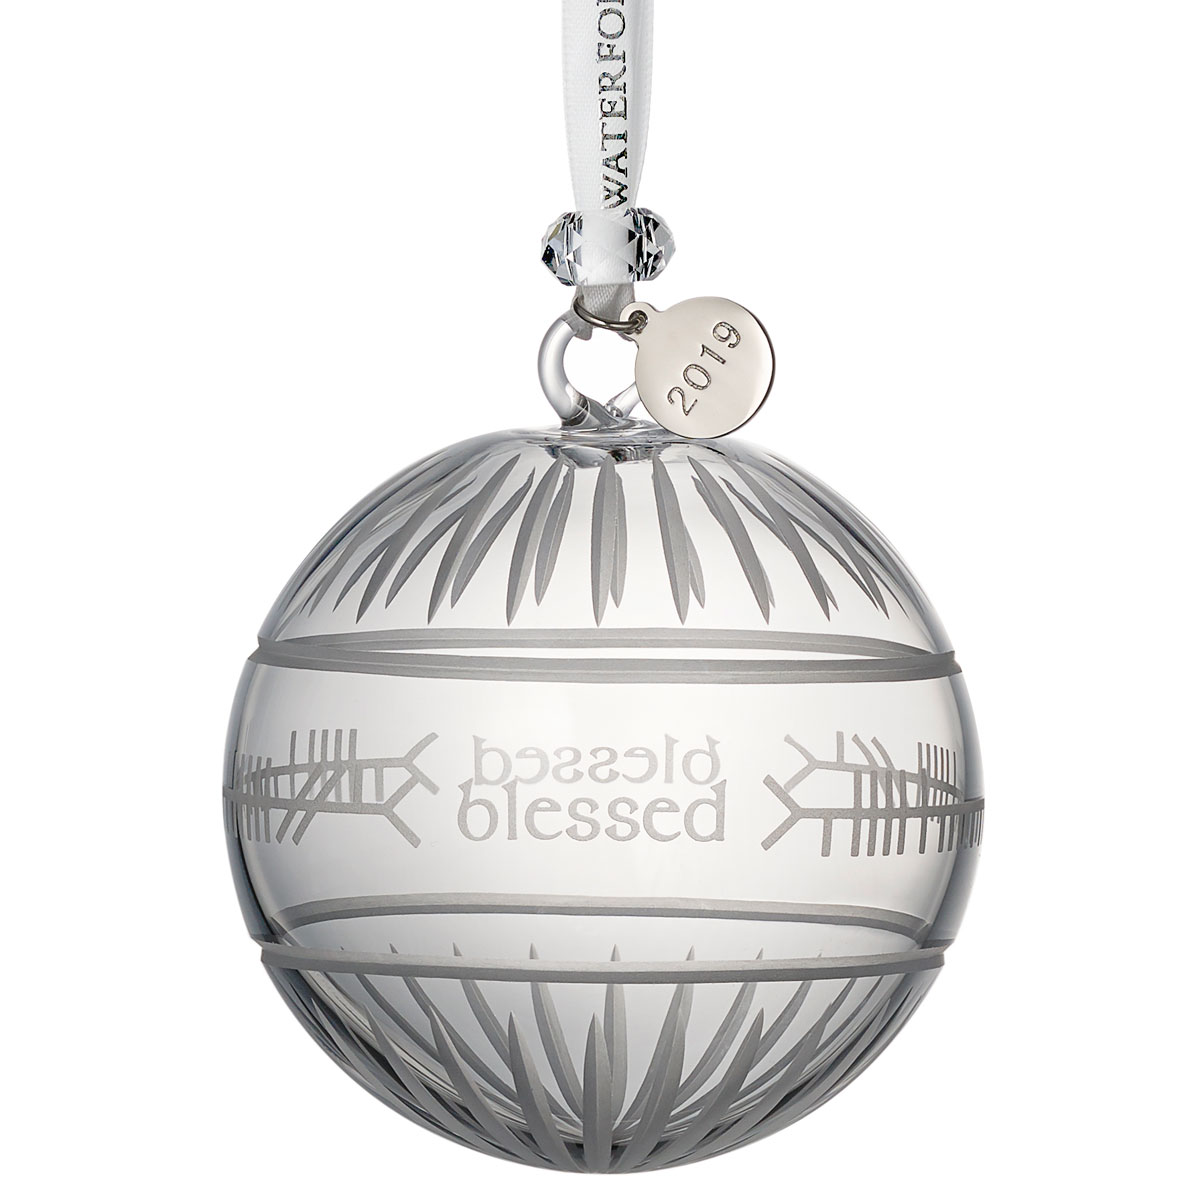 Waterford Crystal 2019 Ogham Blessed Ball Christmas Ornament